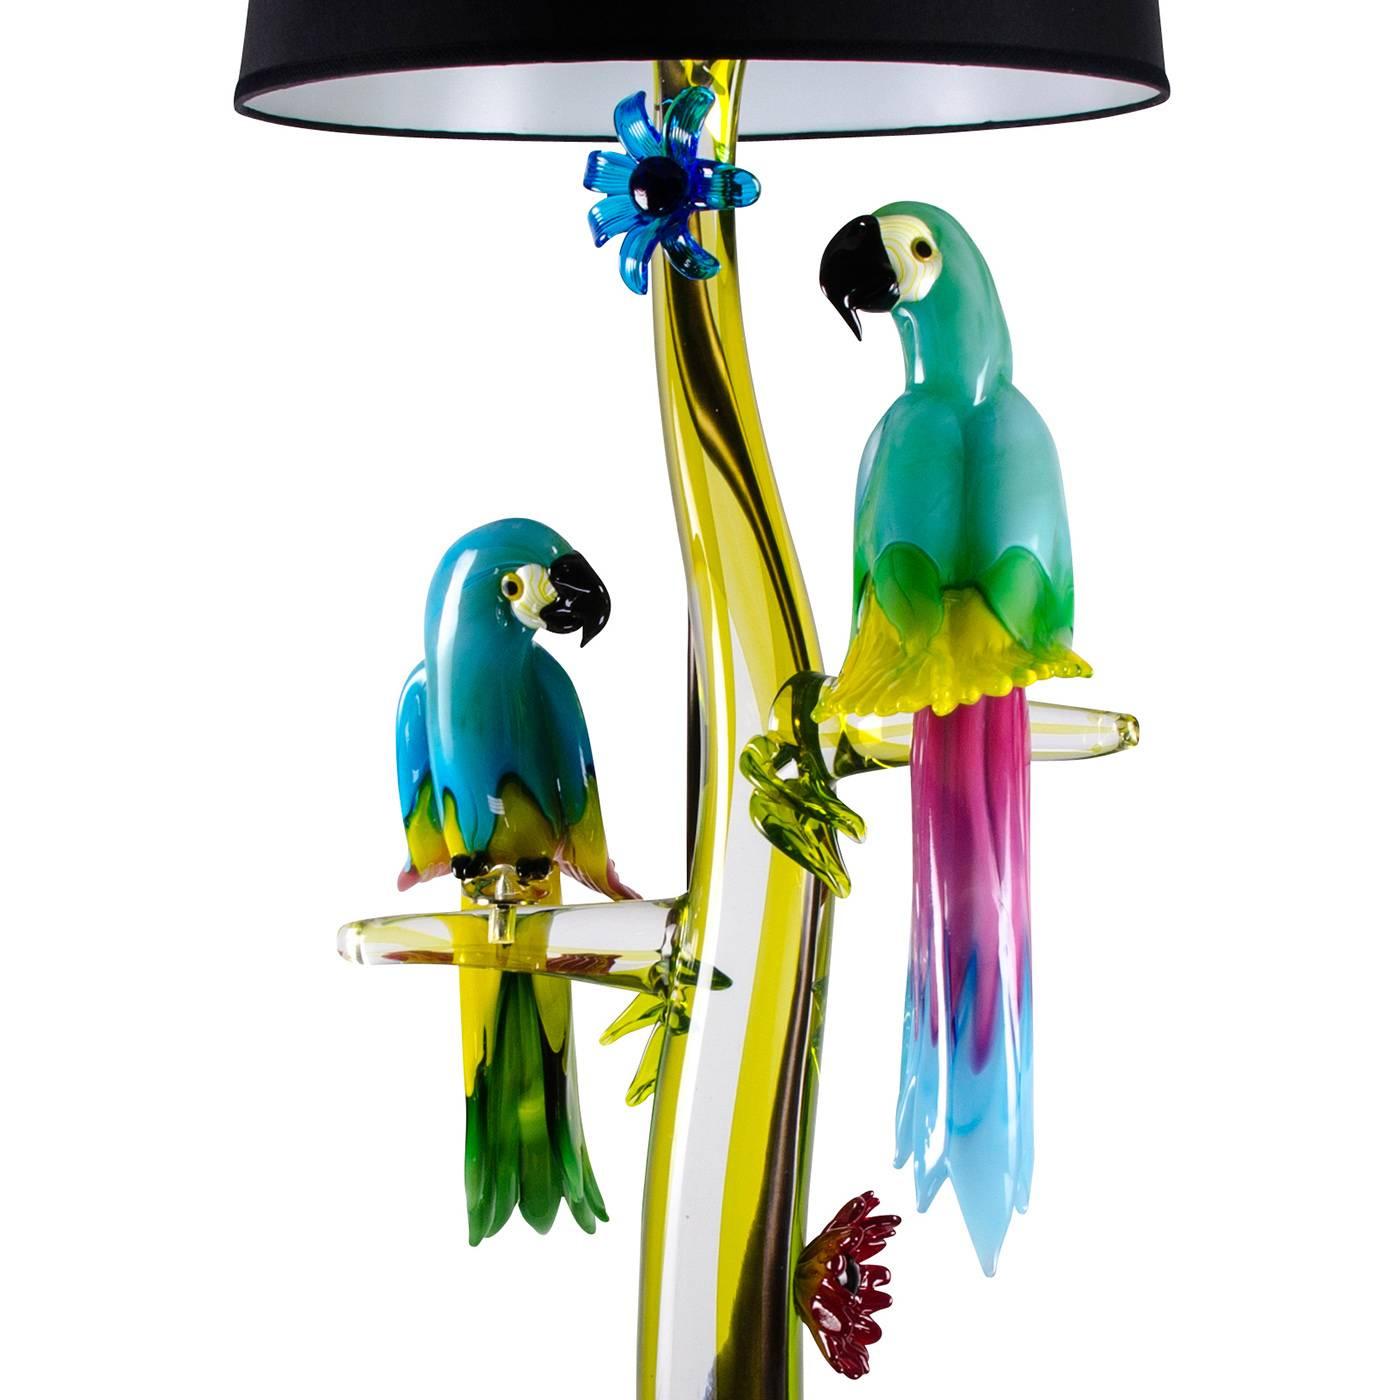 This incredible floor lamp with three Macaw parrots is entirely handmade by the master glass blower Zanetti on the island of Murano in Venice. Remarkably animated and colorful, these birds are made of solid glass and perch on a clear glass branch